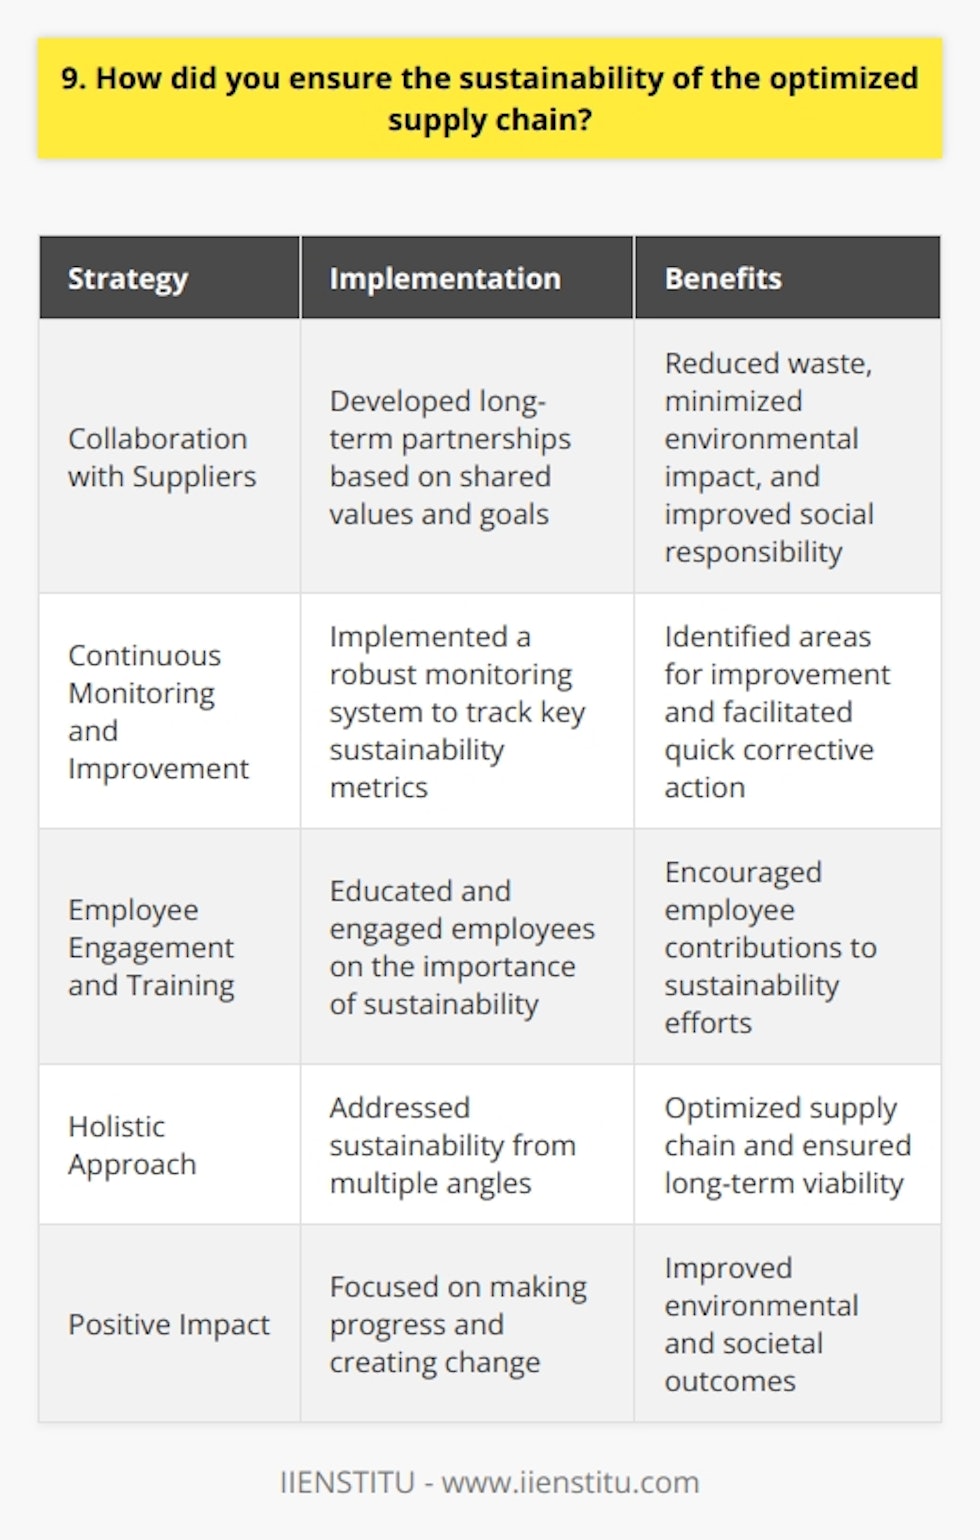 As the supply chain manager, I took a proactive approach to ensure the sustainability of our optimized supply chain. Here are some of the key steps I took: Collaboration with Suppliers I worked closely with our suppliers to develop long-term partnerships based on shared values and goals. We collaborated to identify areas where we could reduce waste, minimize environmental impact, and improve social responsibility throughout the supply chain. Examples: Continuous Monitoring and Improvement I implemented a robust monitoring system to track key sustainability metrics across our supply chain. This allowed us to identify areas for improvement and take corrective action quickly. Examples: Employee Engagement and Training I believe that employee engagement is crucial to the success of any sustainability initiative. I worked to educate and engage our employees on the importance of sustainability and how they could contribute to our efforts. Examples: By taking a holistic approach to sustainability, we were able to not only optimize our supply chain but also ensure its long-term viability. Im proud of the progress we made and the positive impact we had on the environment and society.